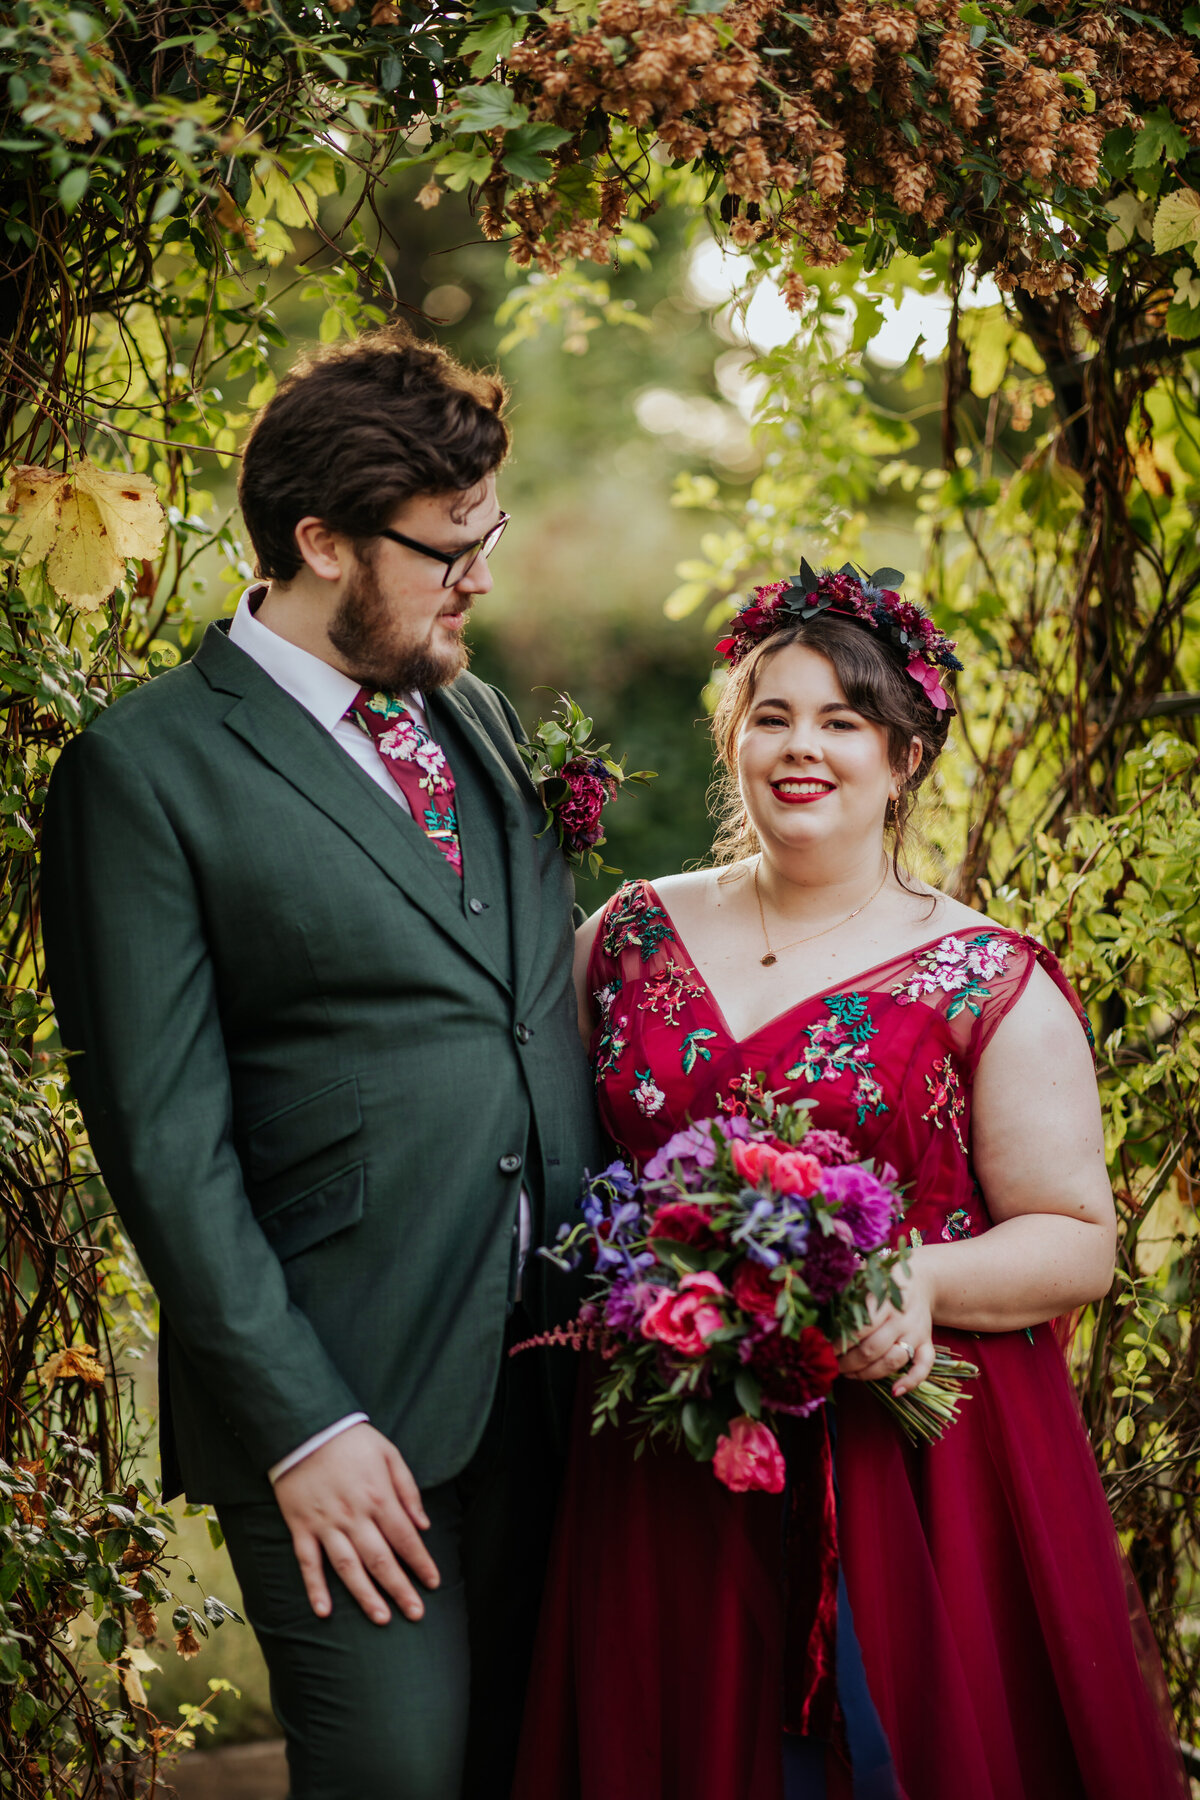 Bride wearing red wedding dress and groom in green suit stand under the arch at Ufton Court during golden hour